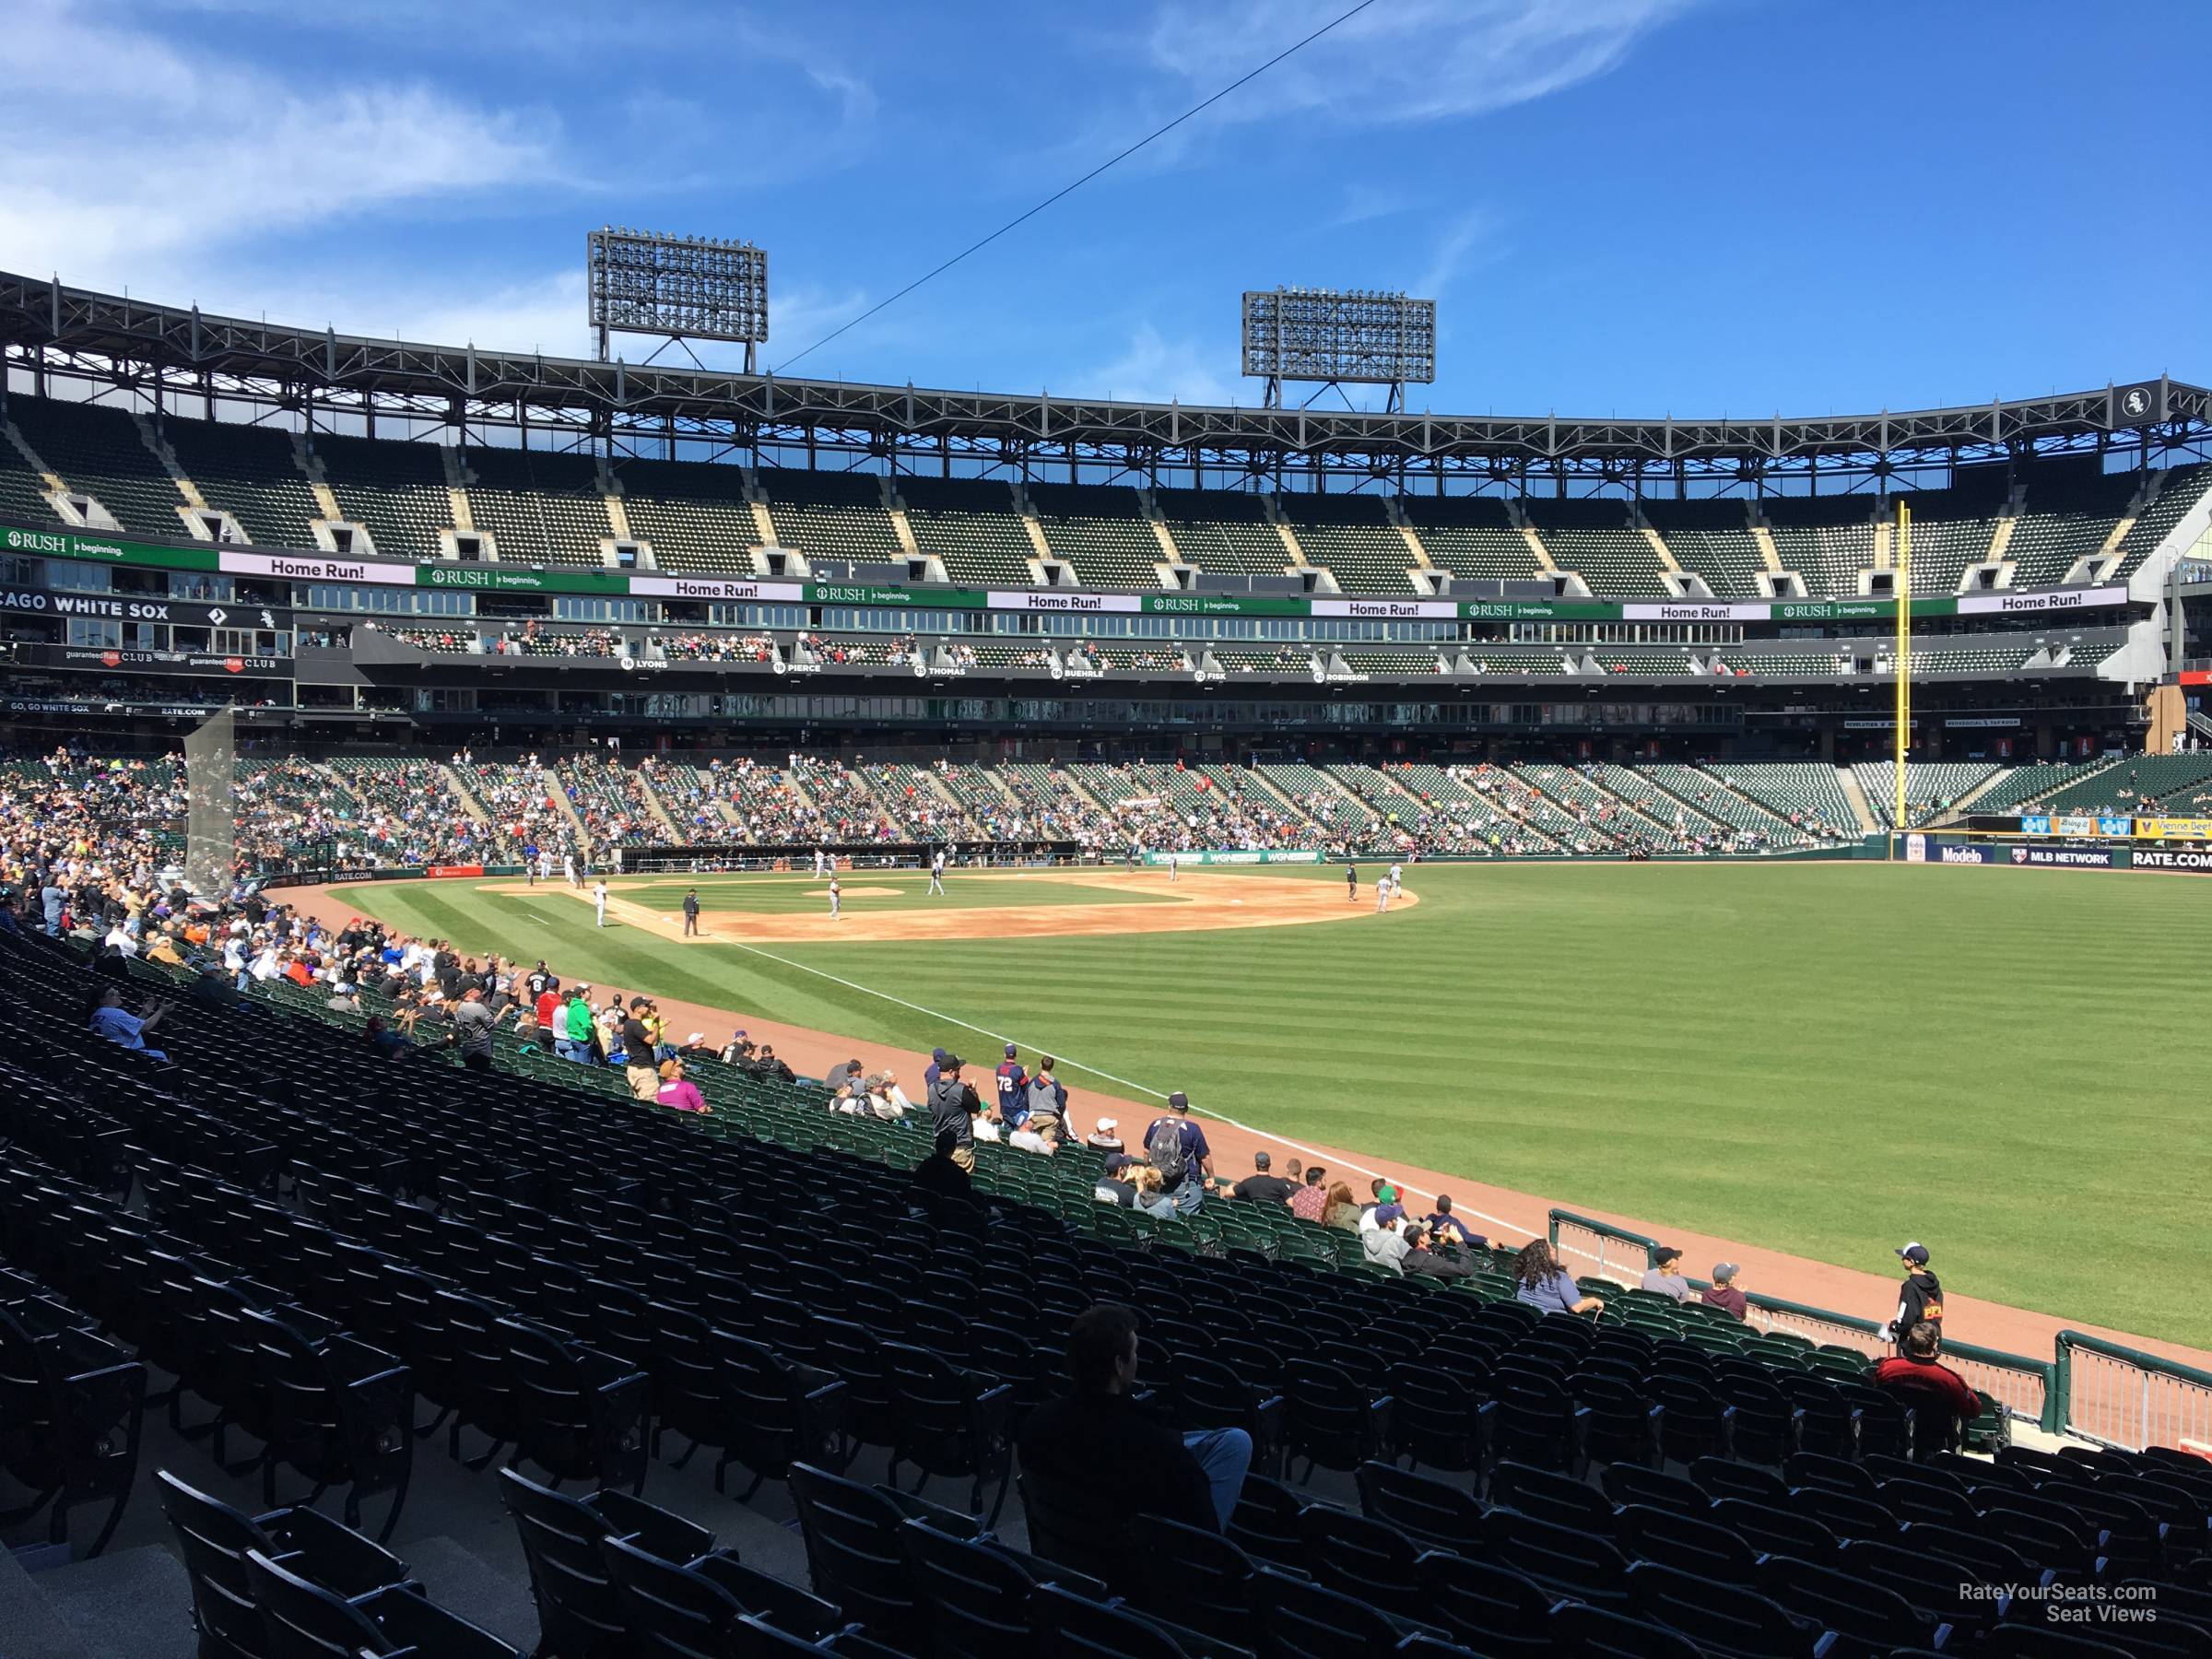 section 110, row 25 seat view  - guaranteed rate field